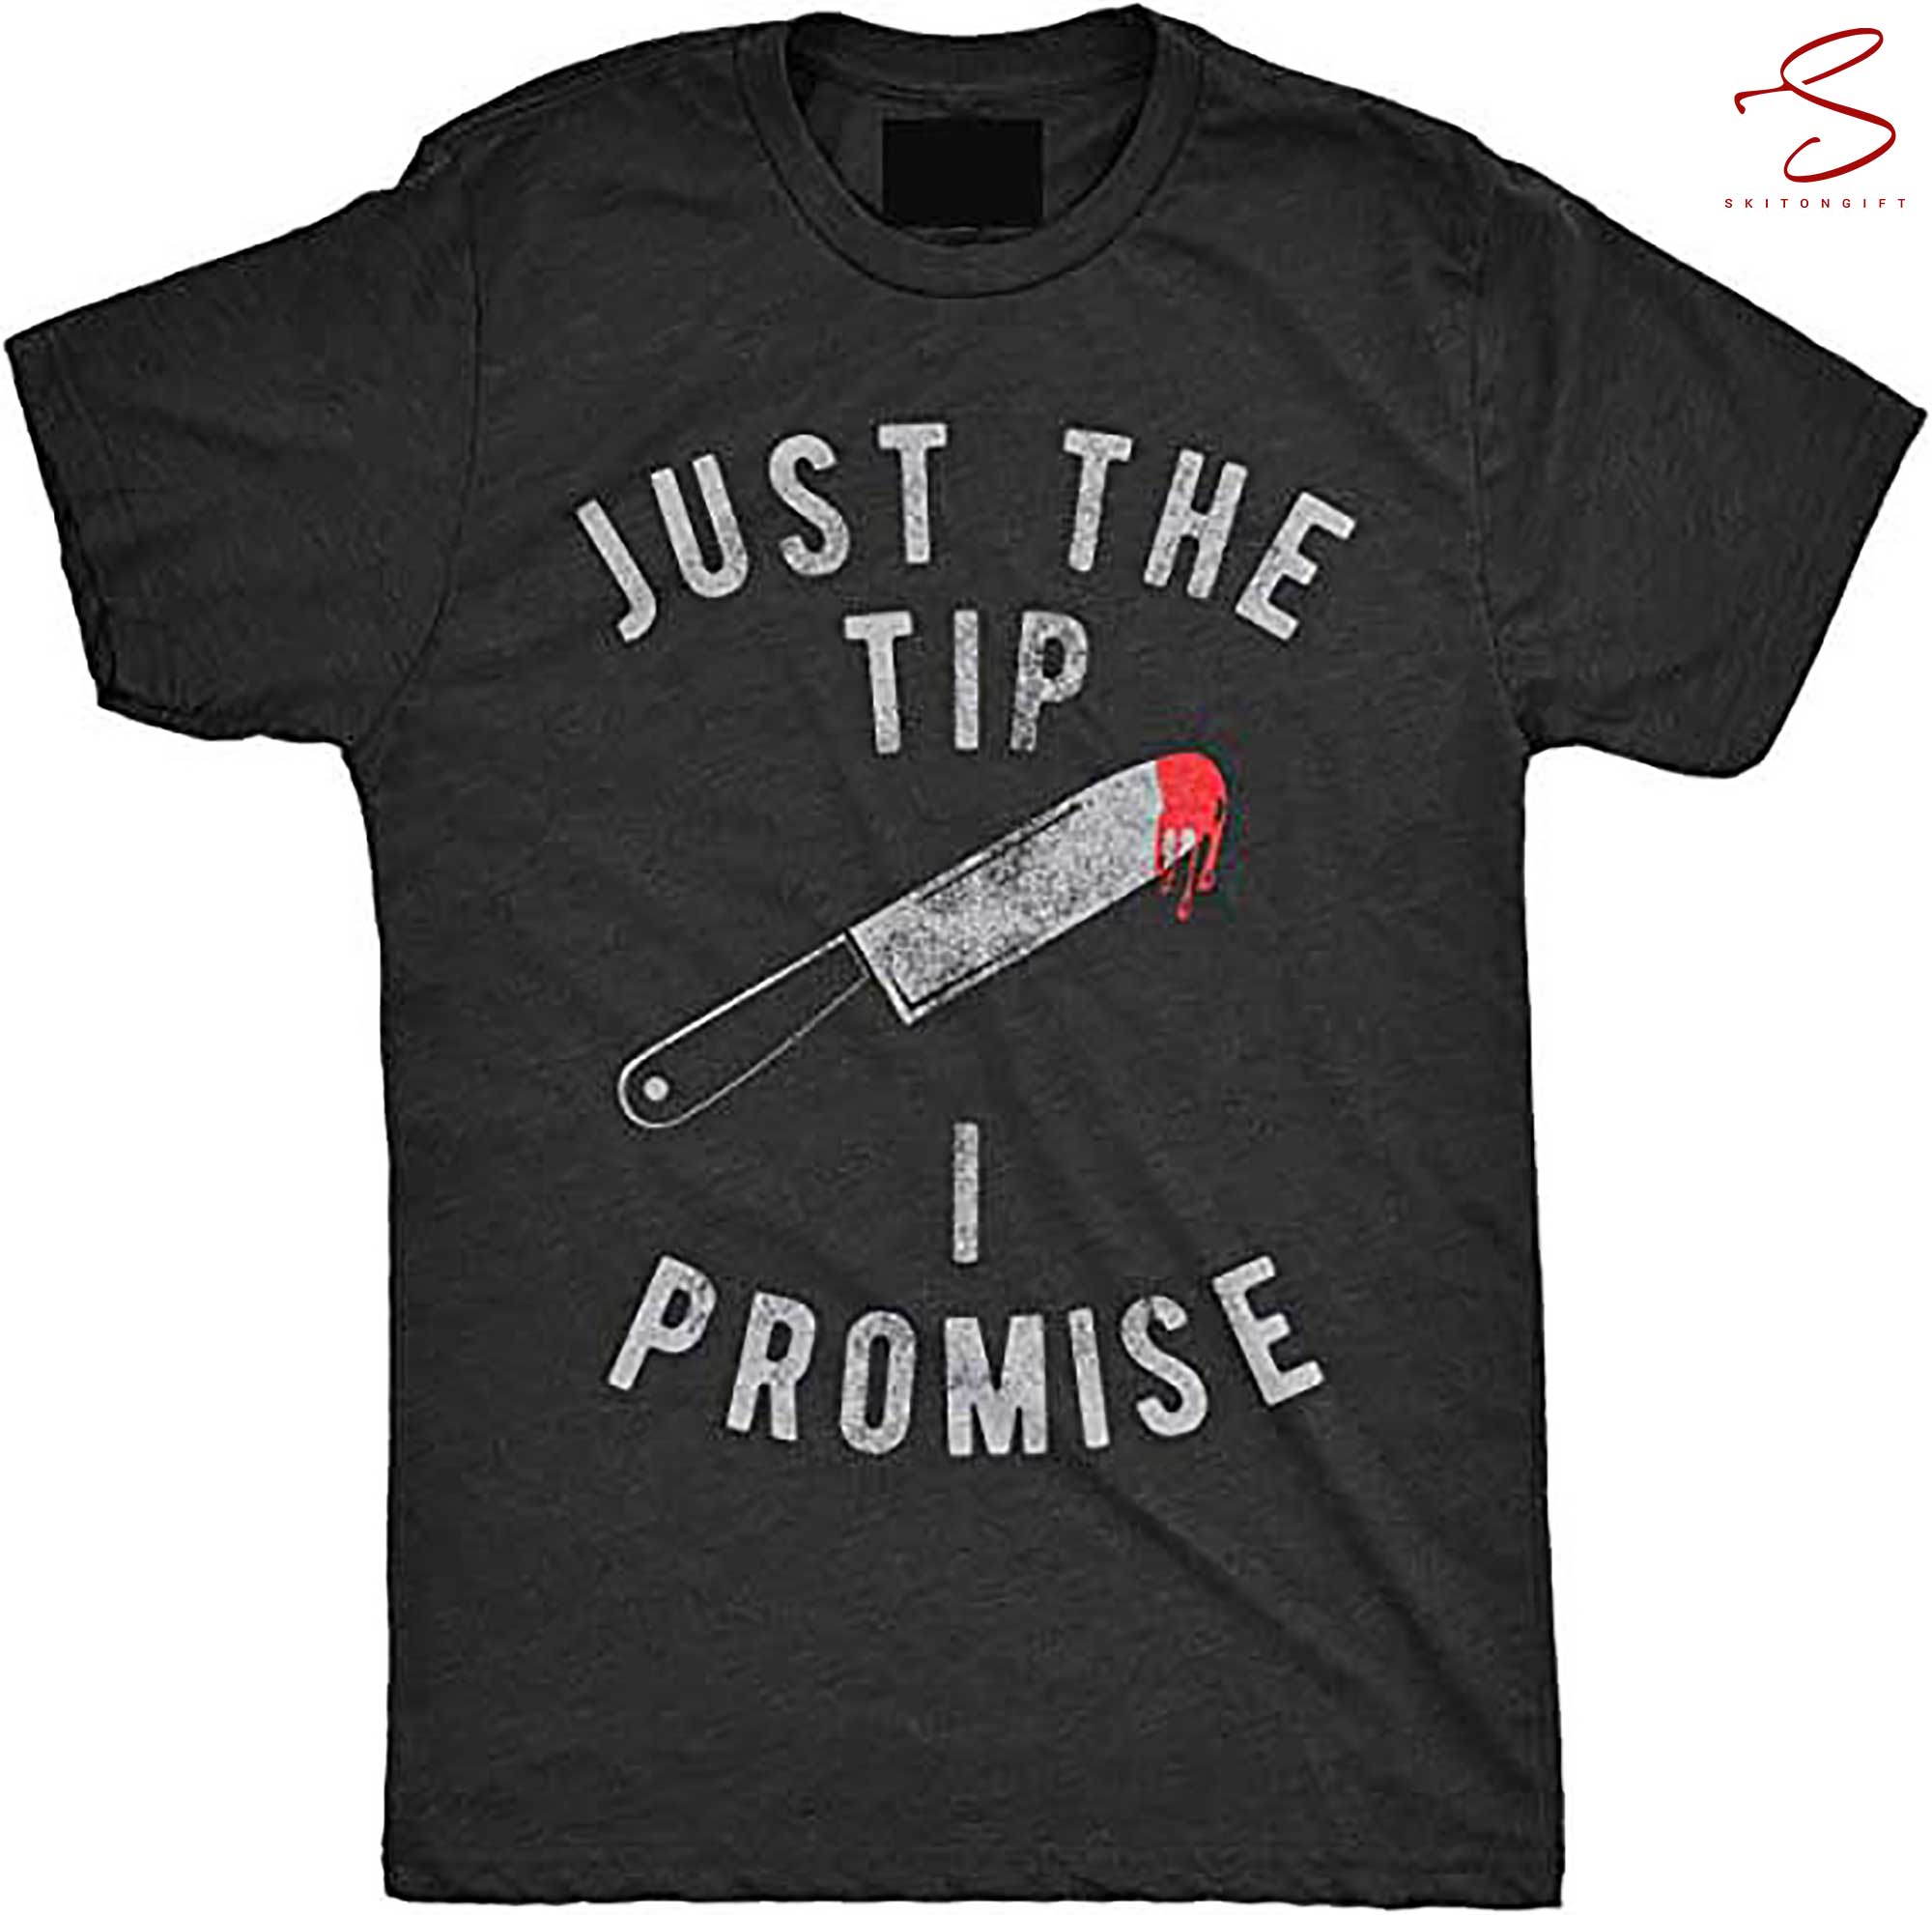 Skitongift Just The Tip I Promise T Shirt Funny Sarcastic Graphic Halloween Black